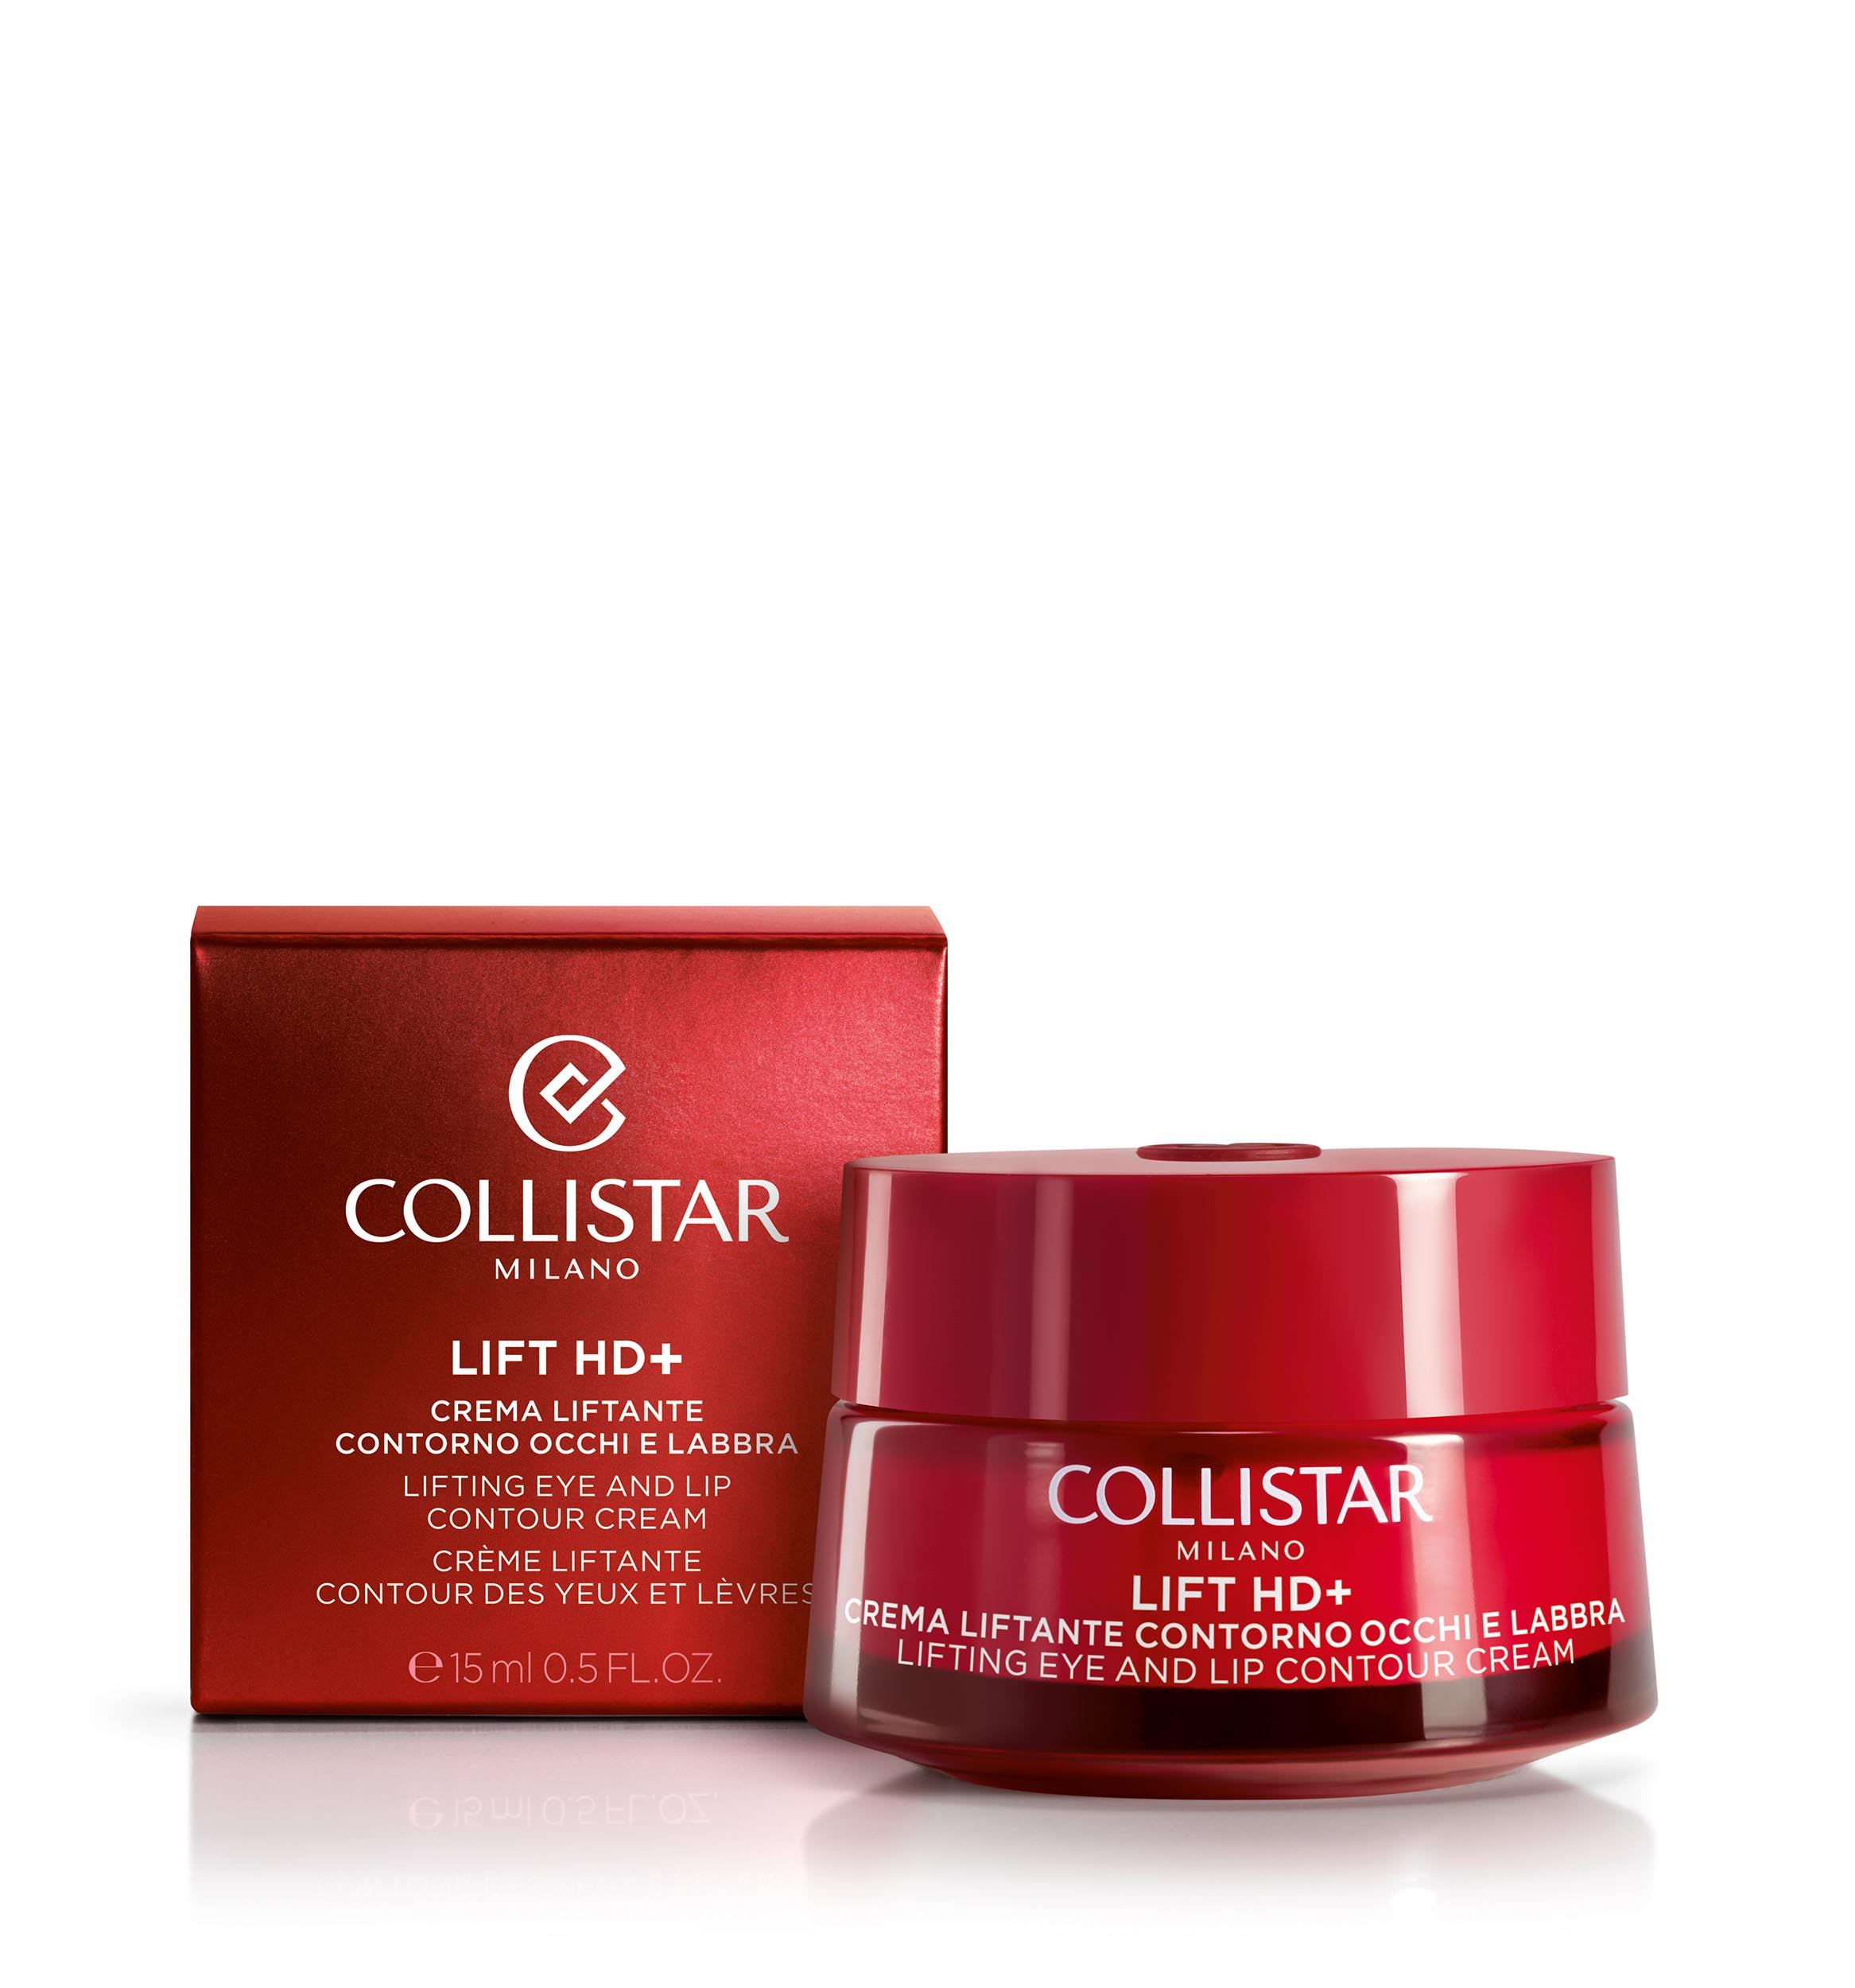 LIFT HD+ LIFTING EYE AND LIP CONTOUR CREAM by Collistar